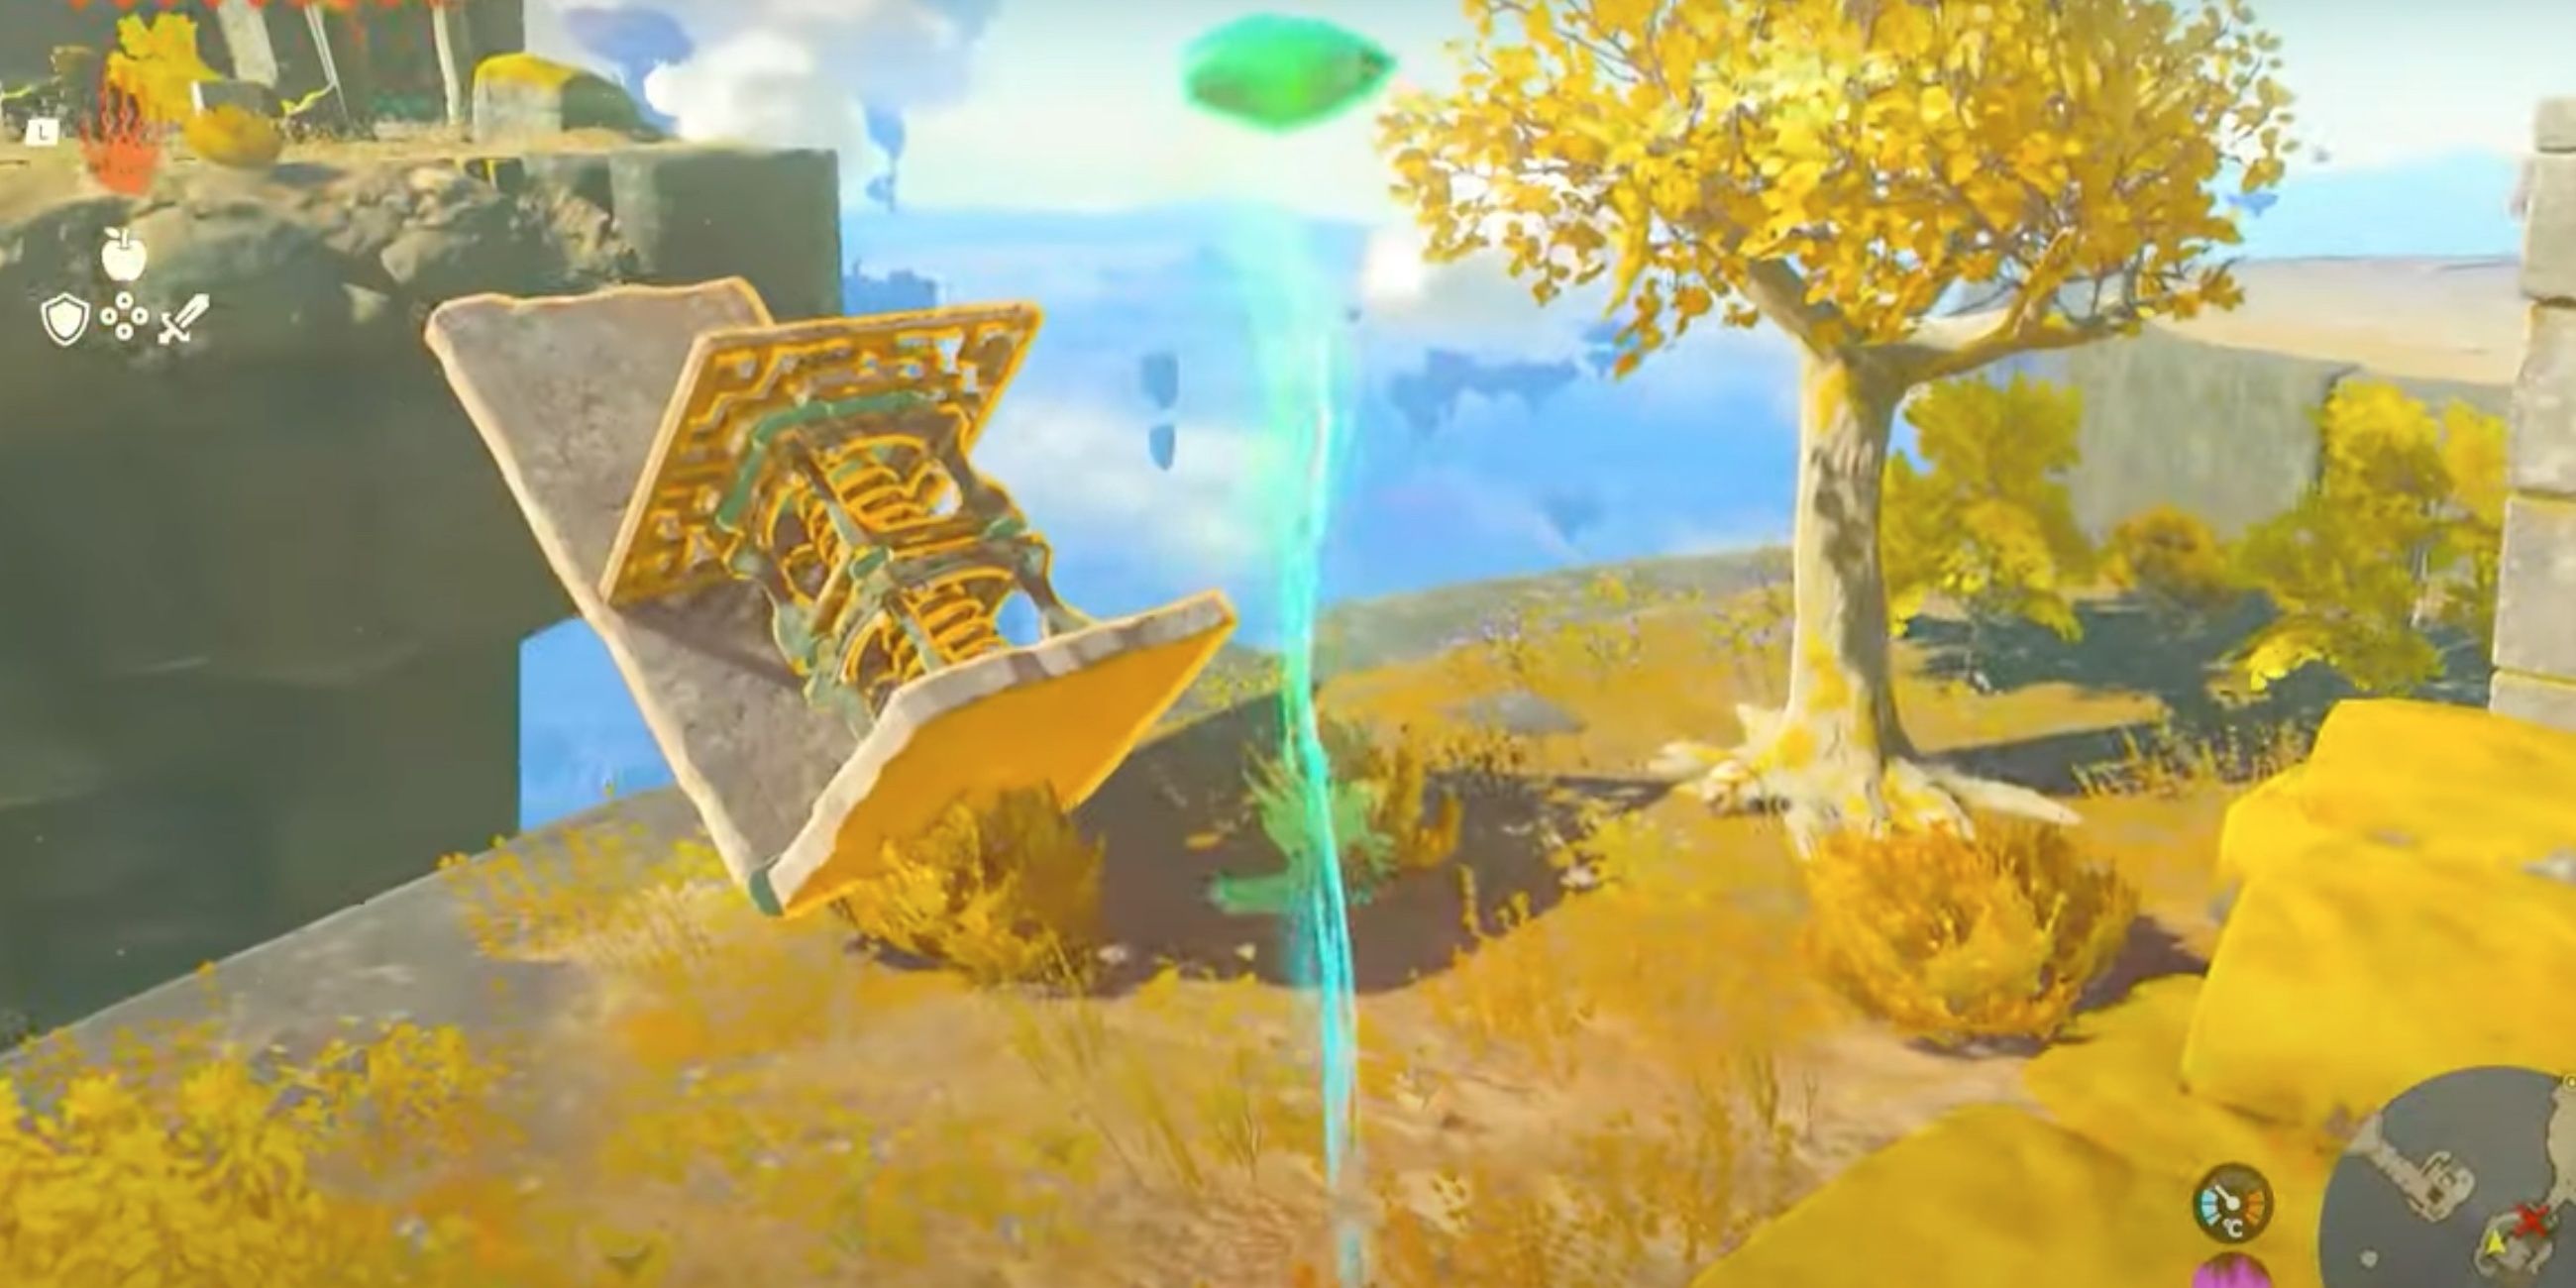 Link prepares to use the launcher to blow crystals in The Legend Of Zelda: Tears of the Kingdom.